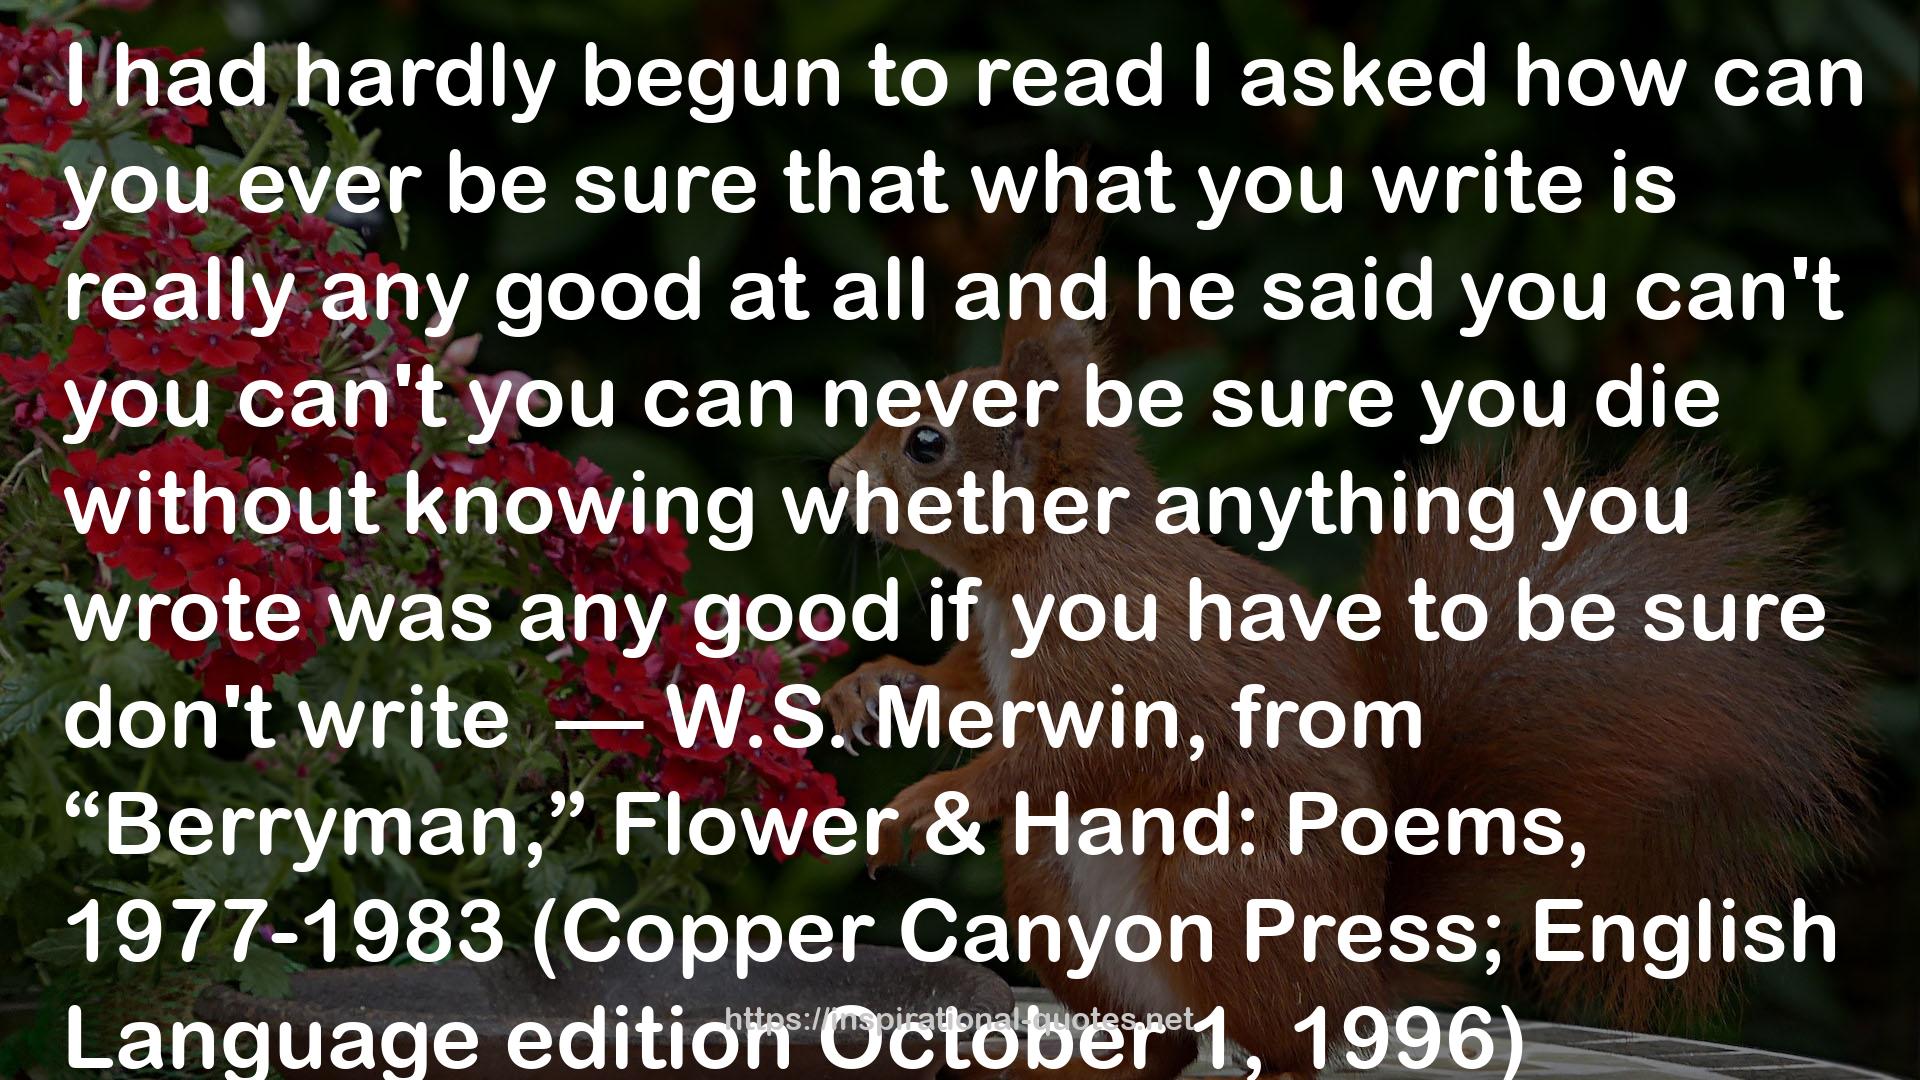 Flower & Hand: Poems, 1977-1983 QUOTES